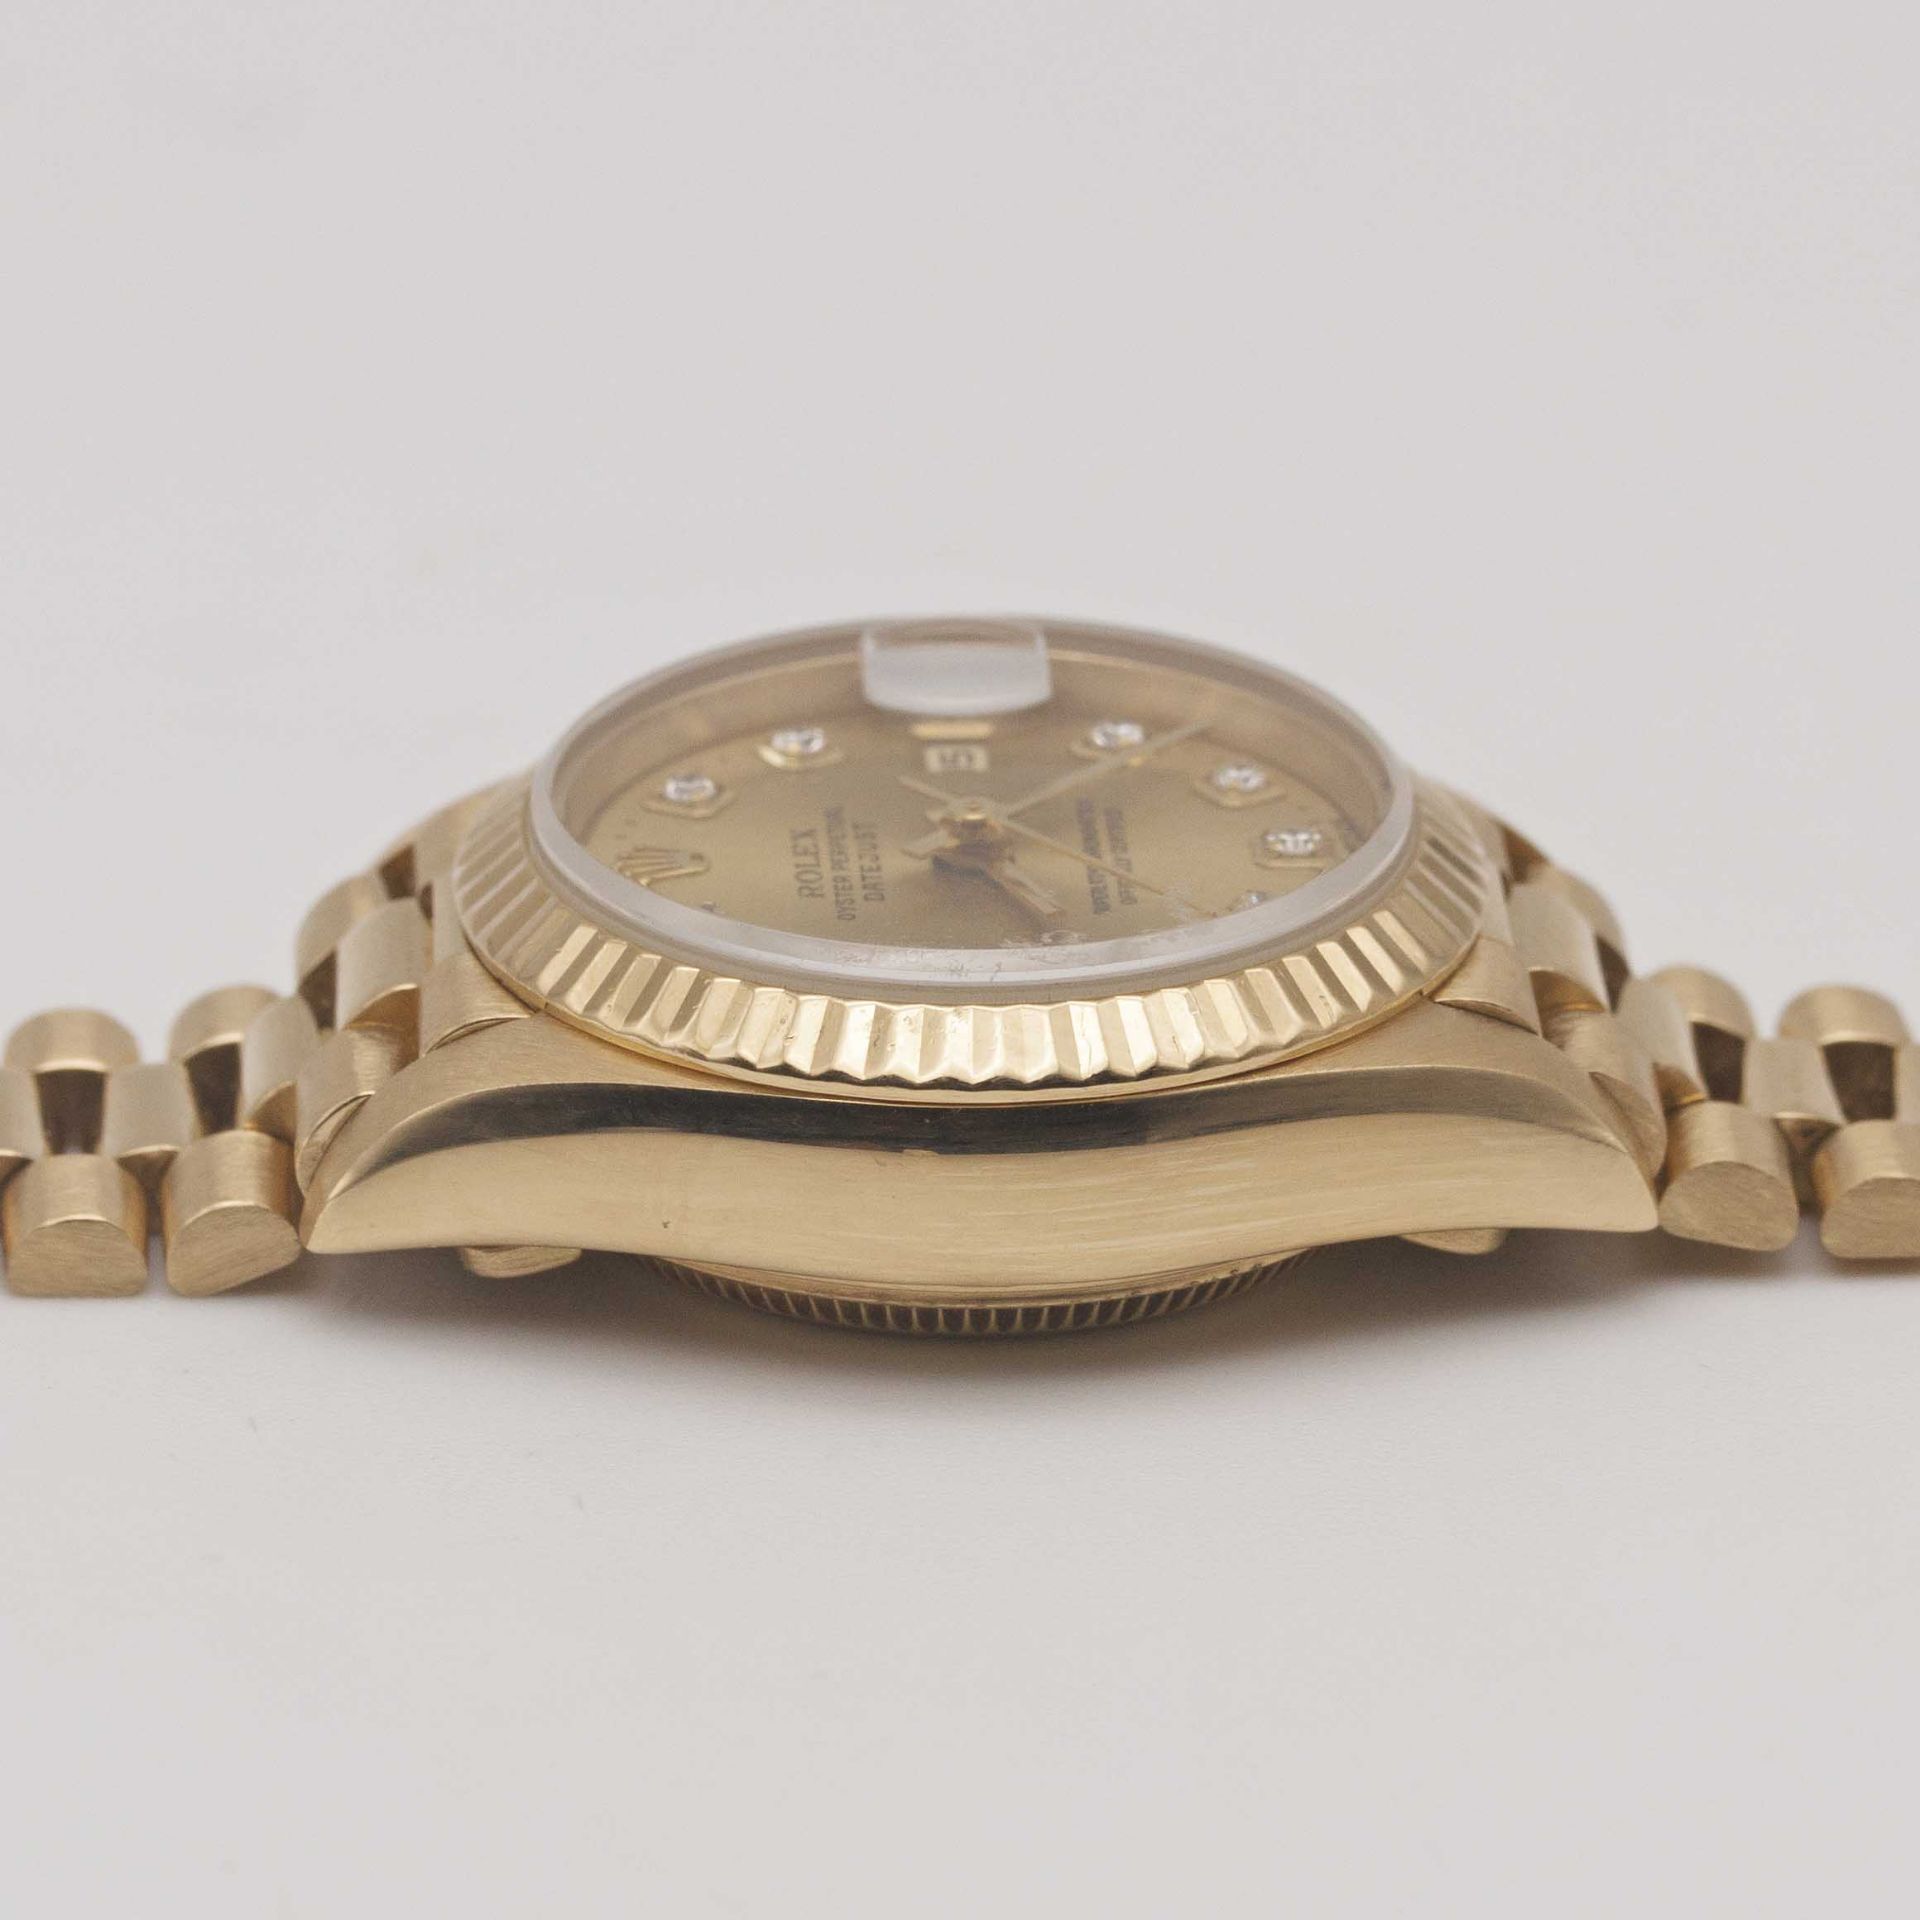 A LADIES 18K SOLID GOLD ROLEX OYSTER PERPETUAL DATEJUST BRACELET WATCH CIRCA 1996, REF. 69178 WITH - Image 9 of 12